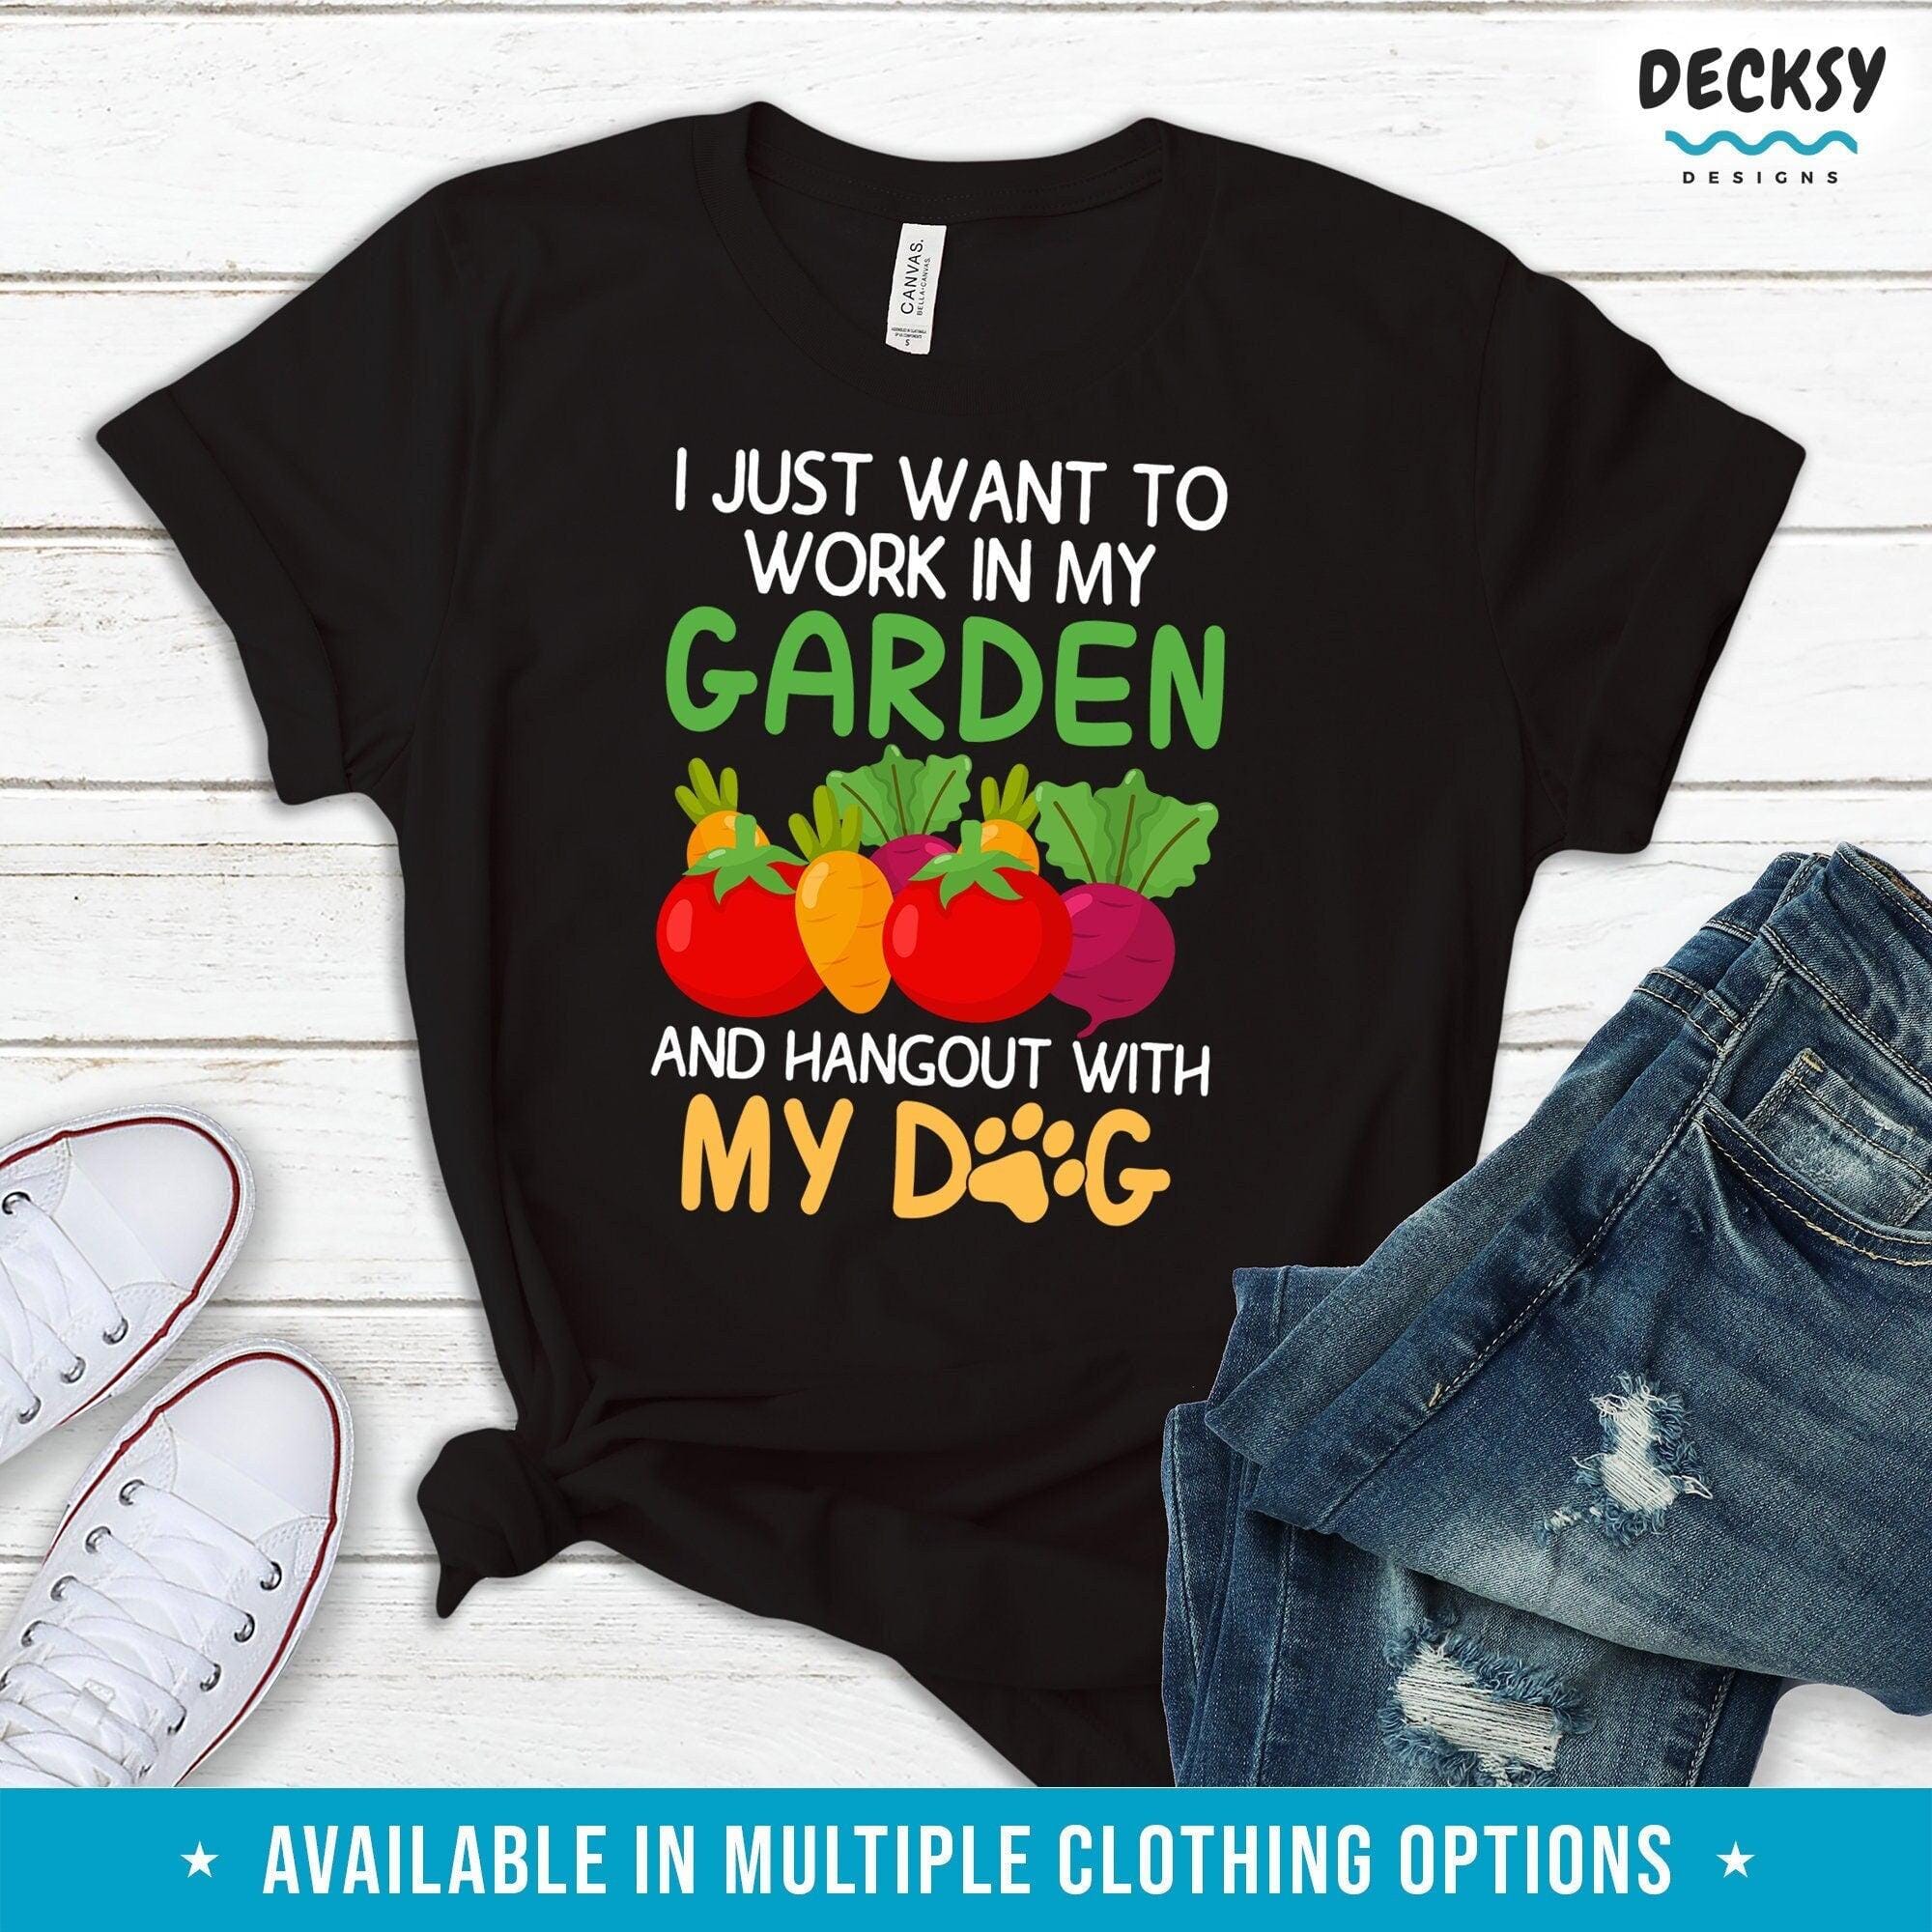 Gardening Shirt, Dog Owner Gift-Clothing:Gender-Neutral Adult Clothing:Tops & Tees:T-shirts:Graphic Tees-DecksyDesigns